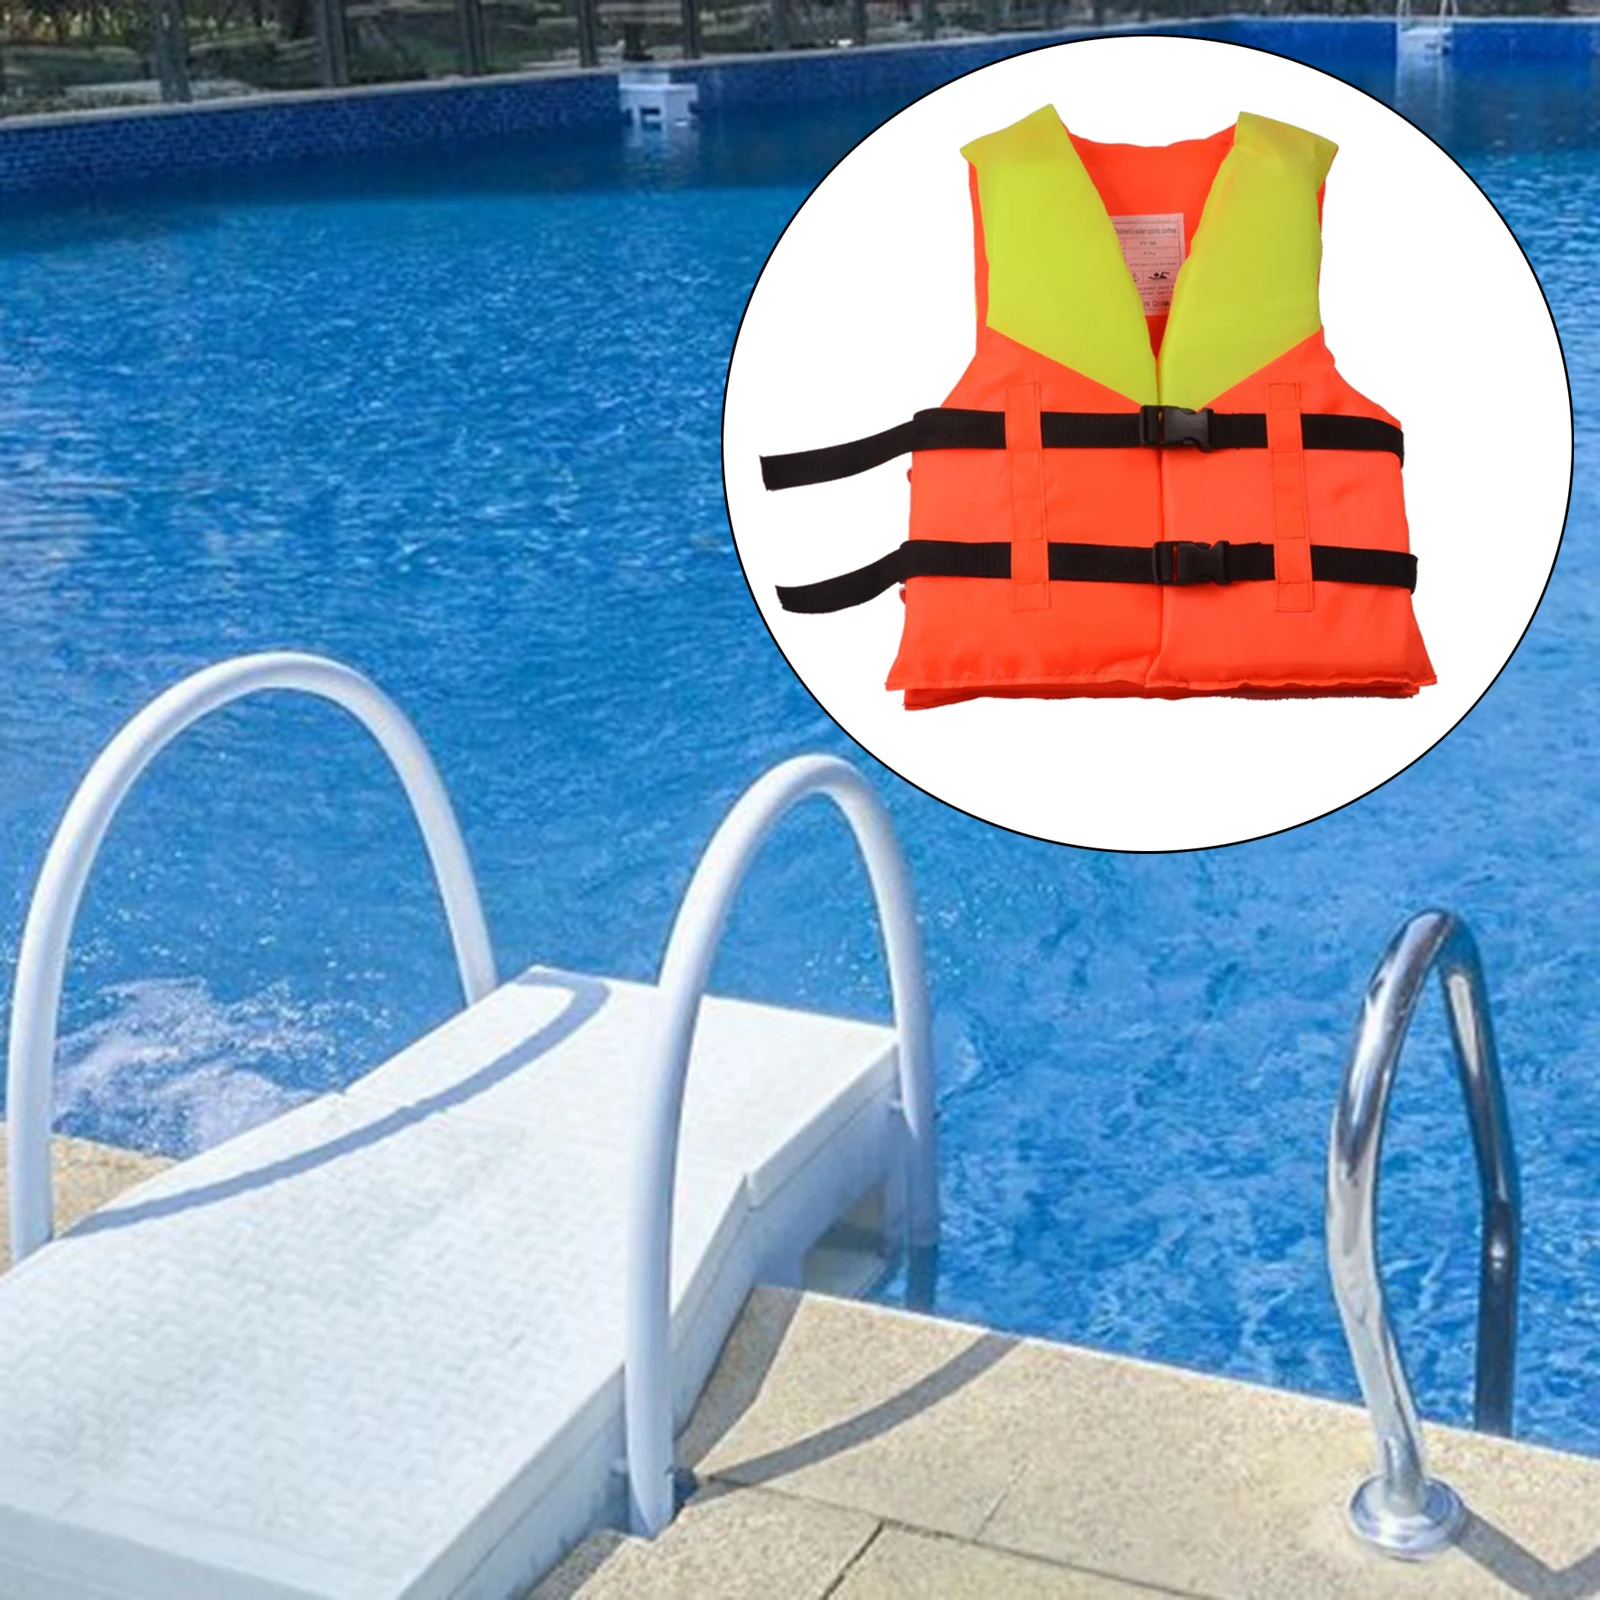 Universal Child Float Jacket Kids Swim Vest Oxford Cloth Life Jacket Ski Vest for Toddlers with Safety Strap Age 4-10 Years